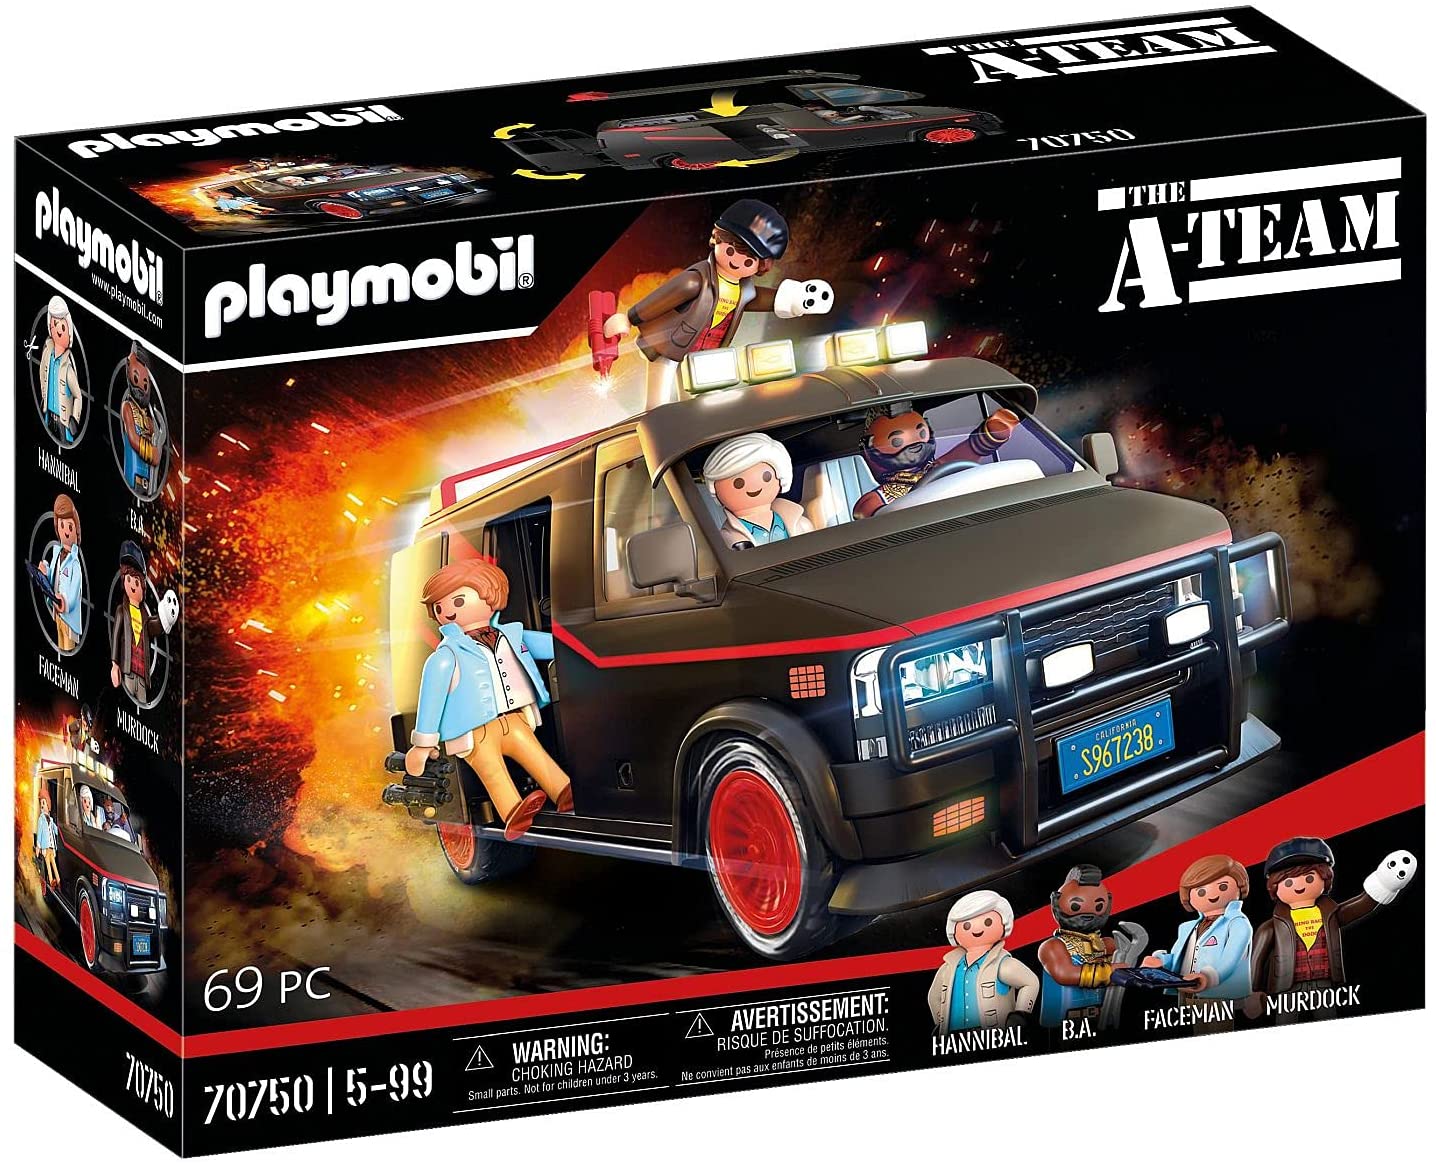 PLAYMOBIL 70750 The A-Team Van - in iconic design, for A-Team fans, collect